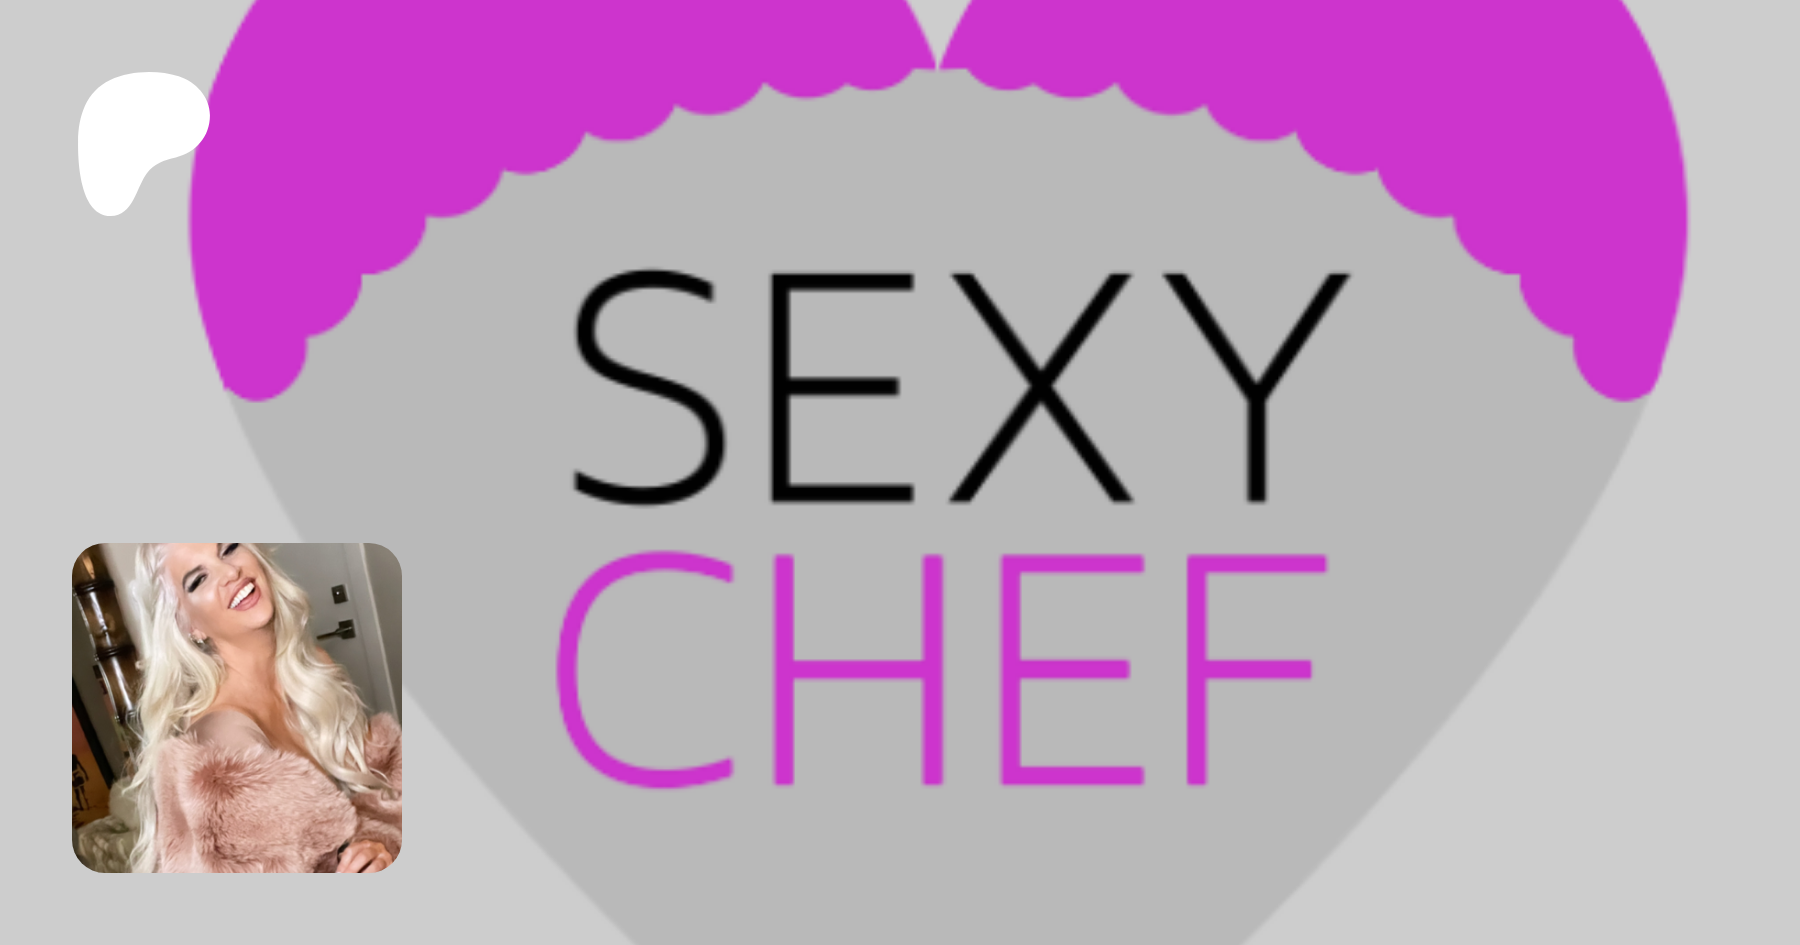 Wendy Lane | creating Classic Sexy Chef Wendy | Patreon